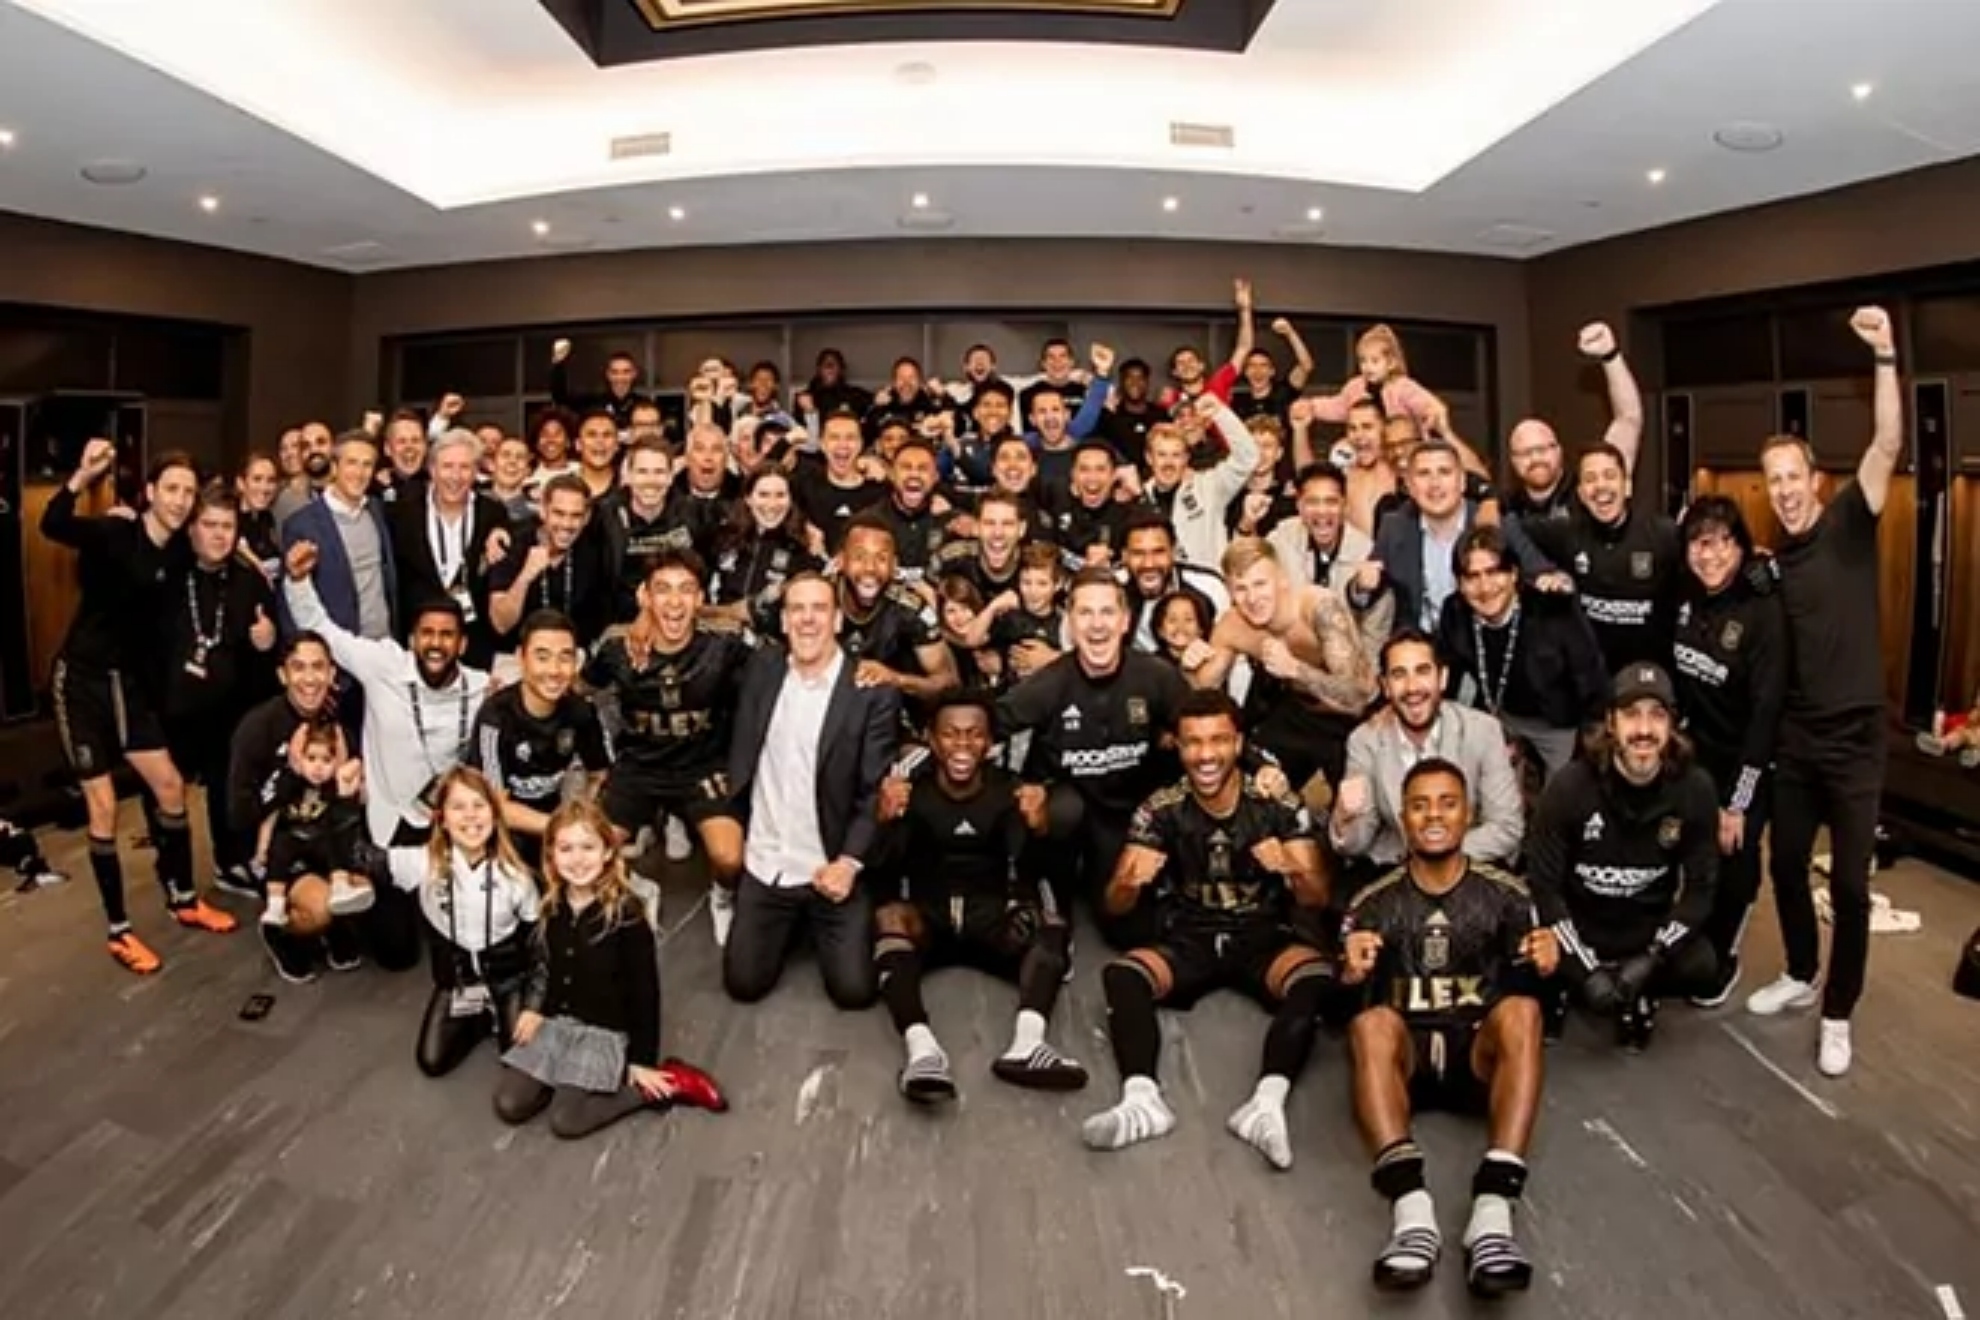 LAFC shaping up to be one of the great and most epic teams in the U.S.